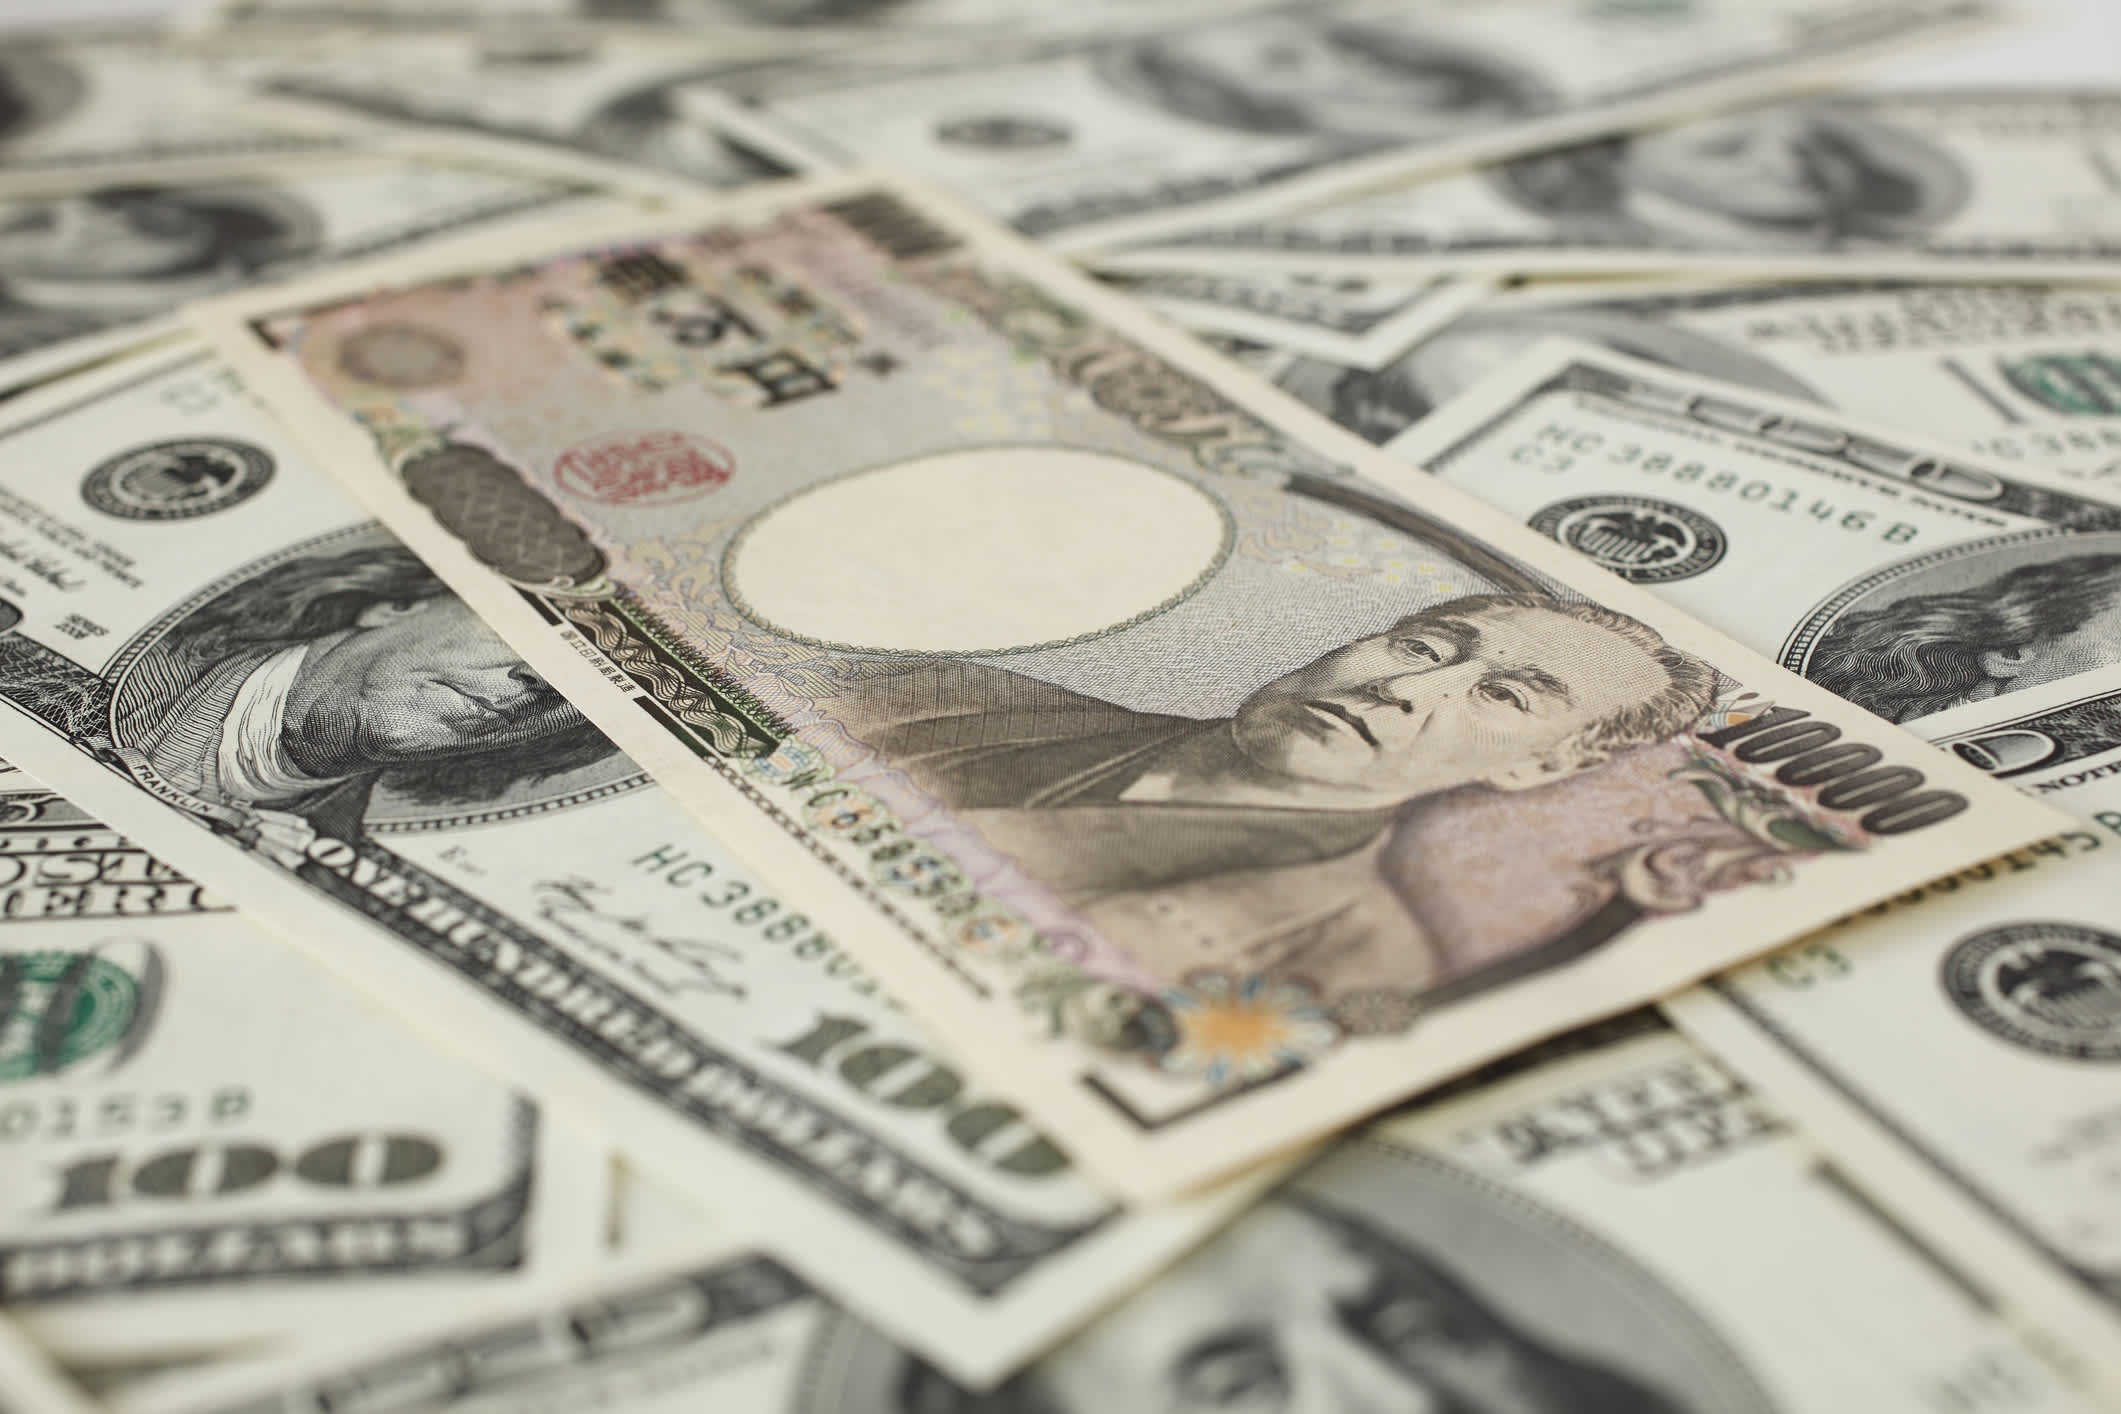 What's next for the sinking yen as Japan hints at intervention? Here's what the pros say